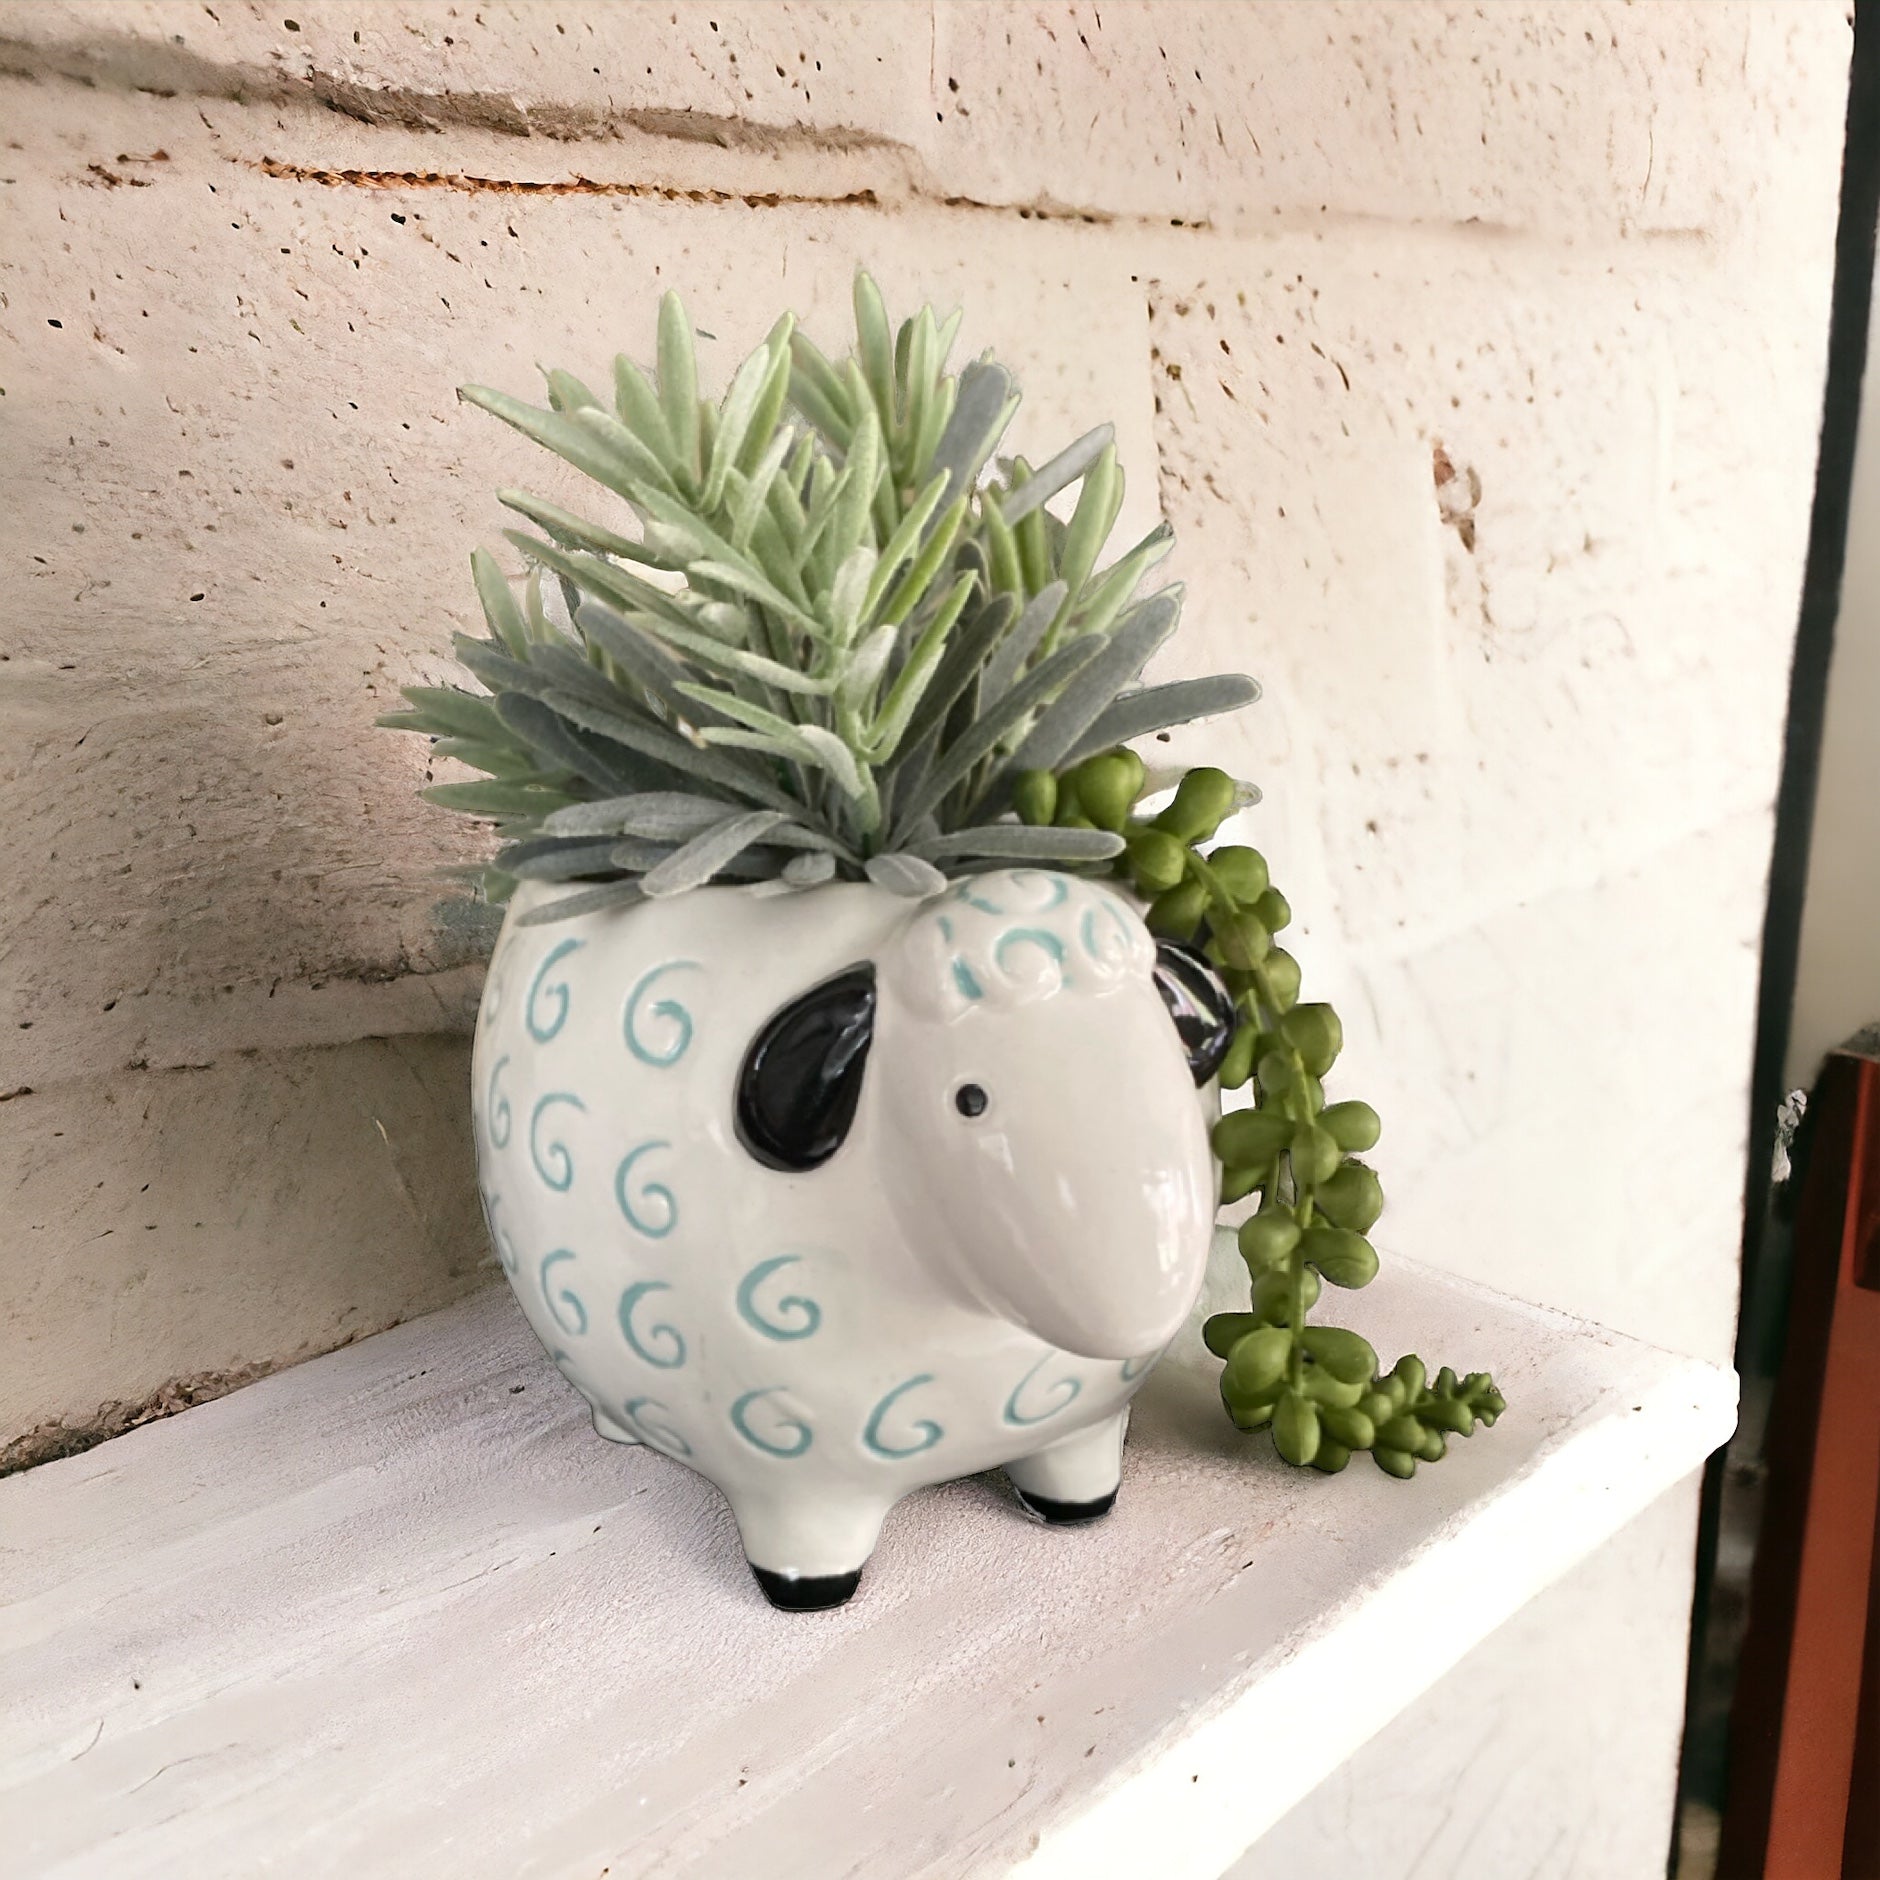 Sheep Pot Plant Garden - The Renmy Store Homewares & Gifts 